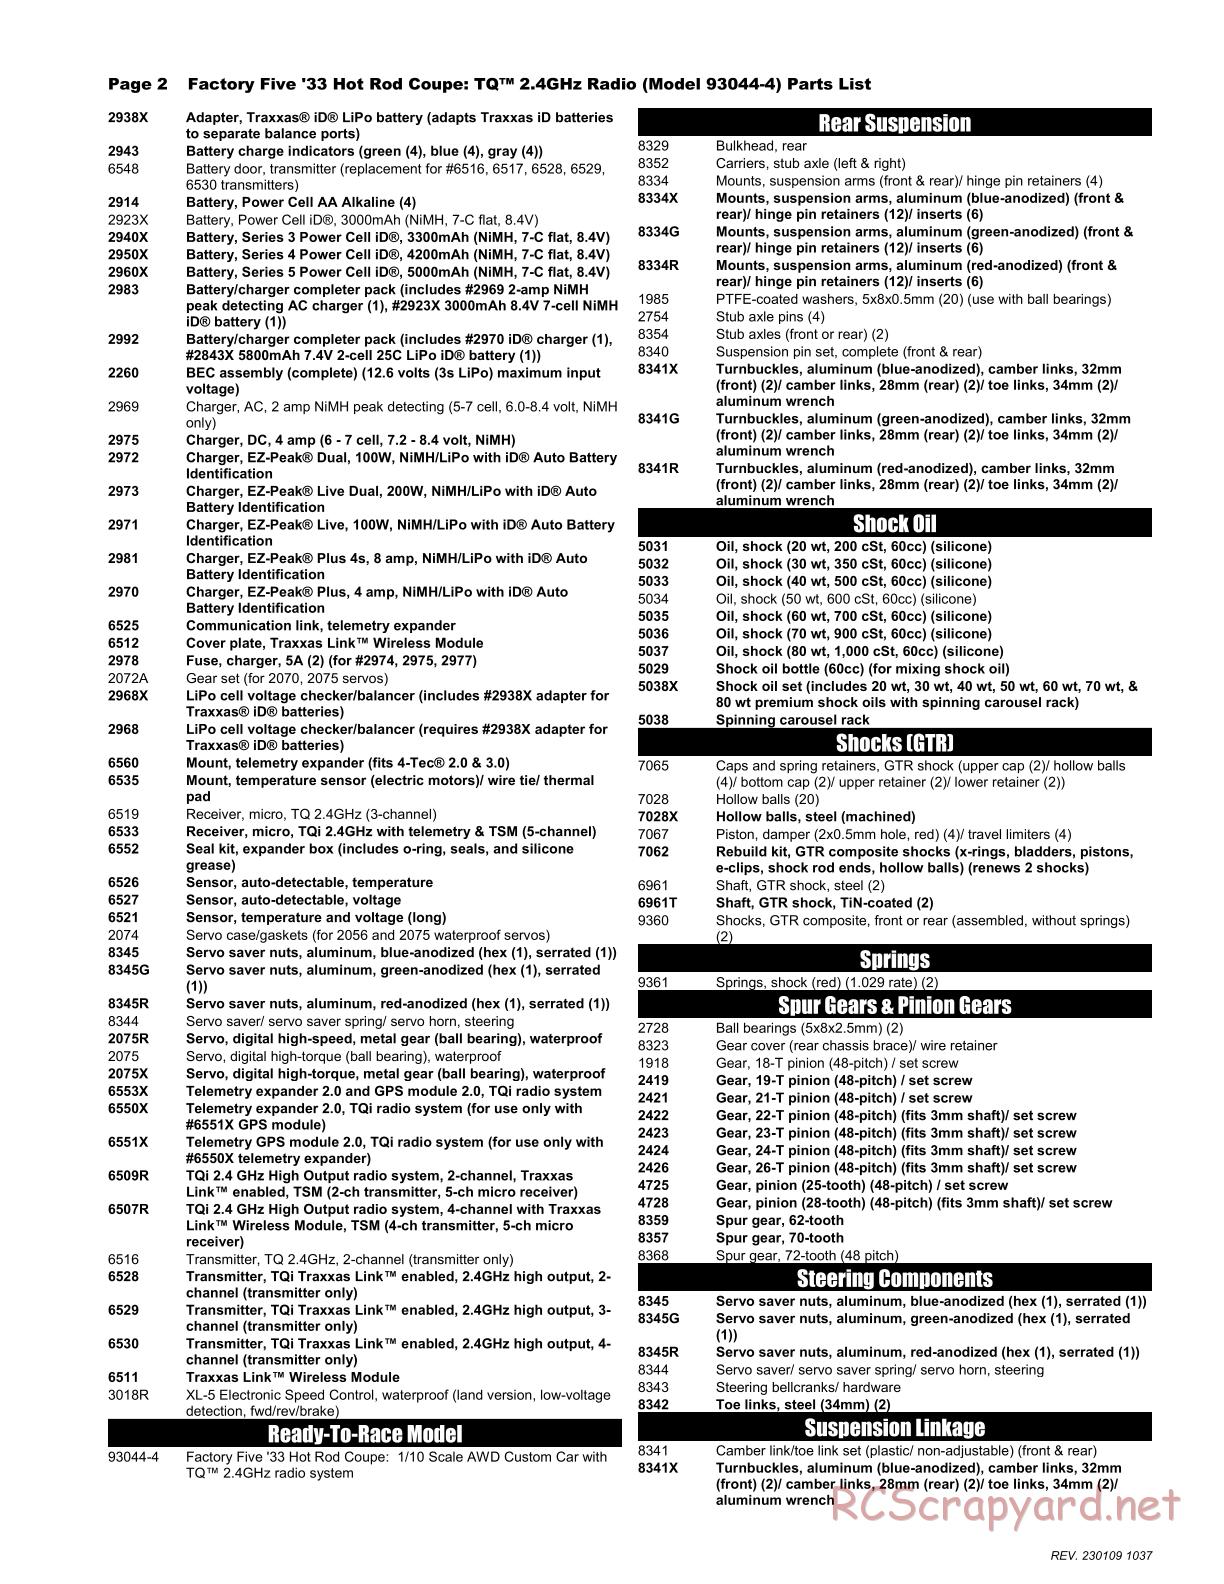 Traxxas - Hot Rod 1933 Coupe - Parts List - Page 2